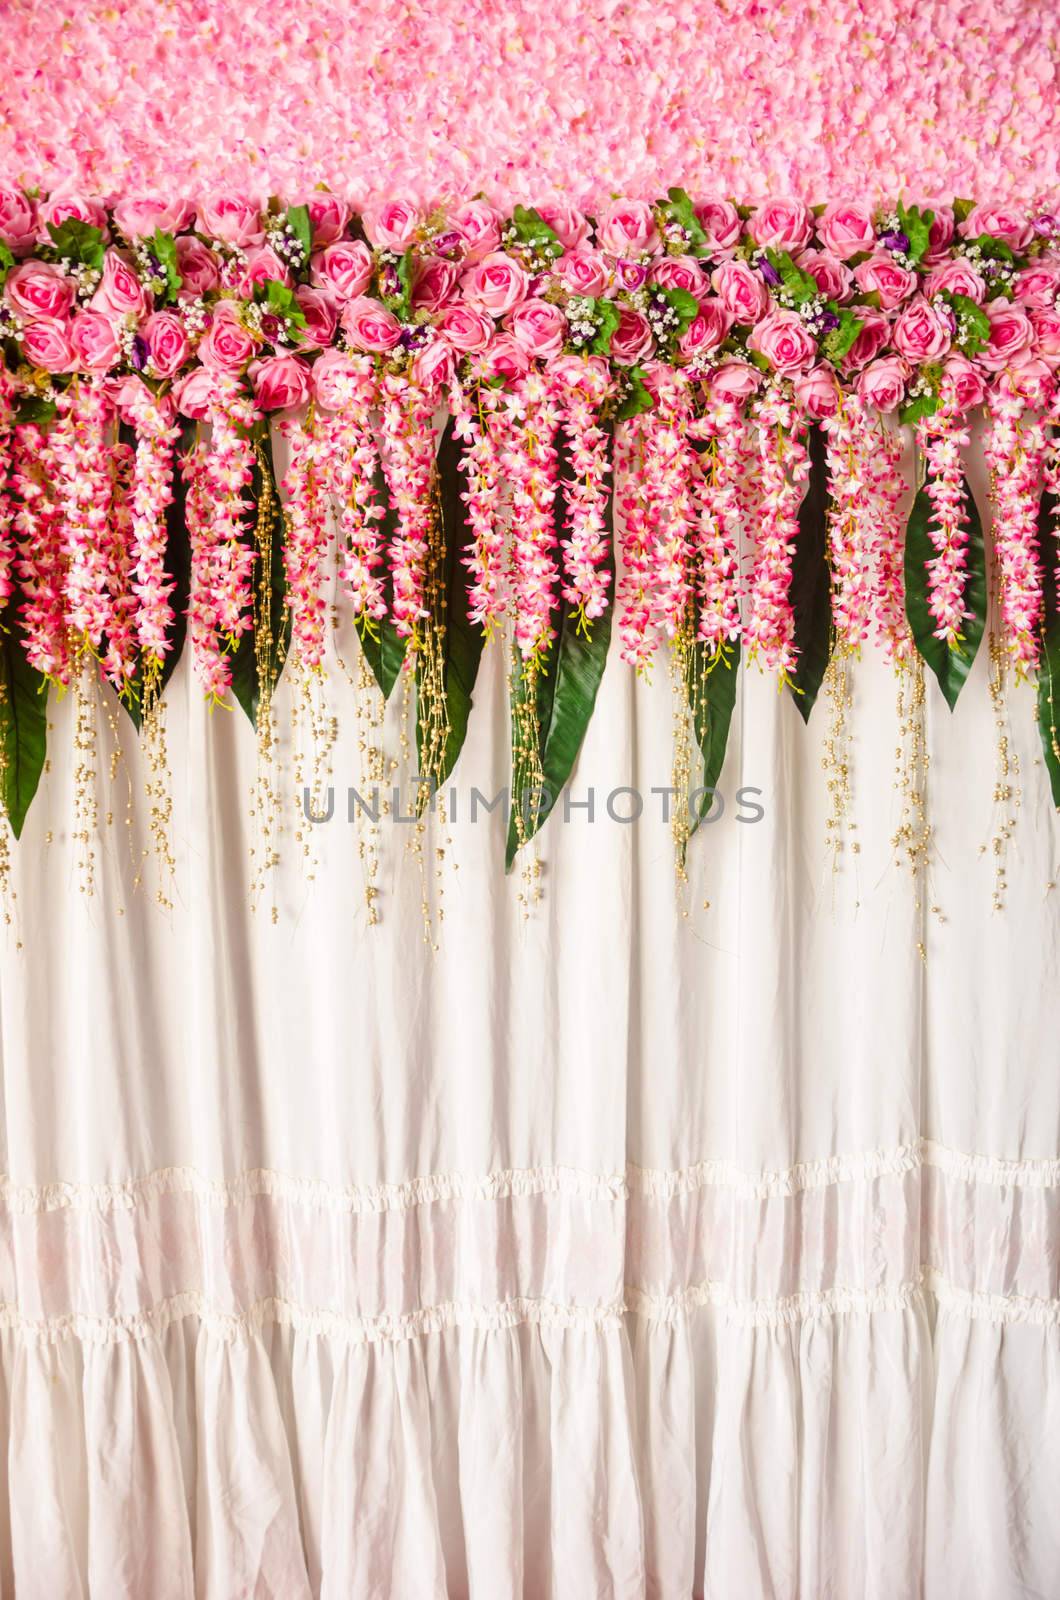 Colorful backdrop pink rose flowers ready for wedding ceremony.